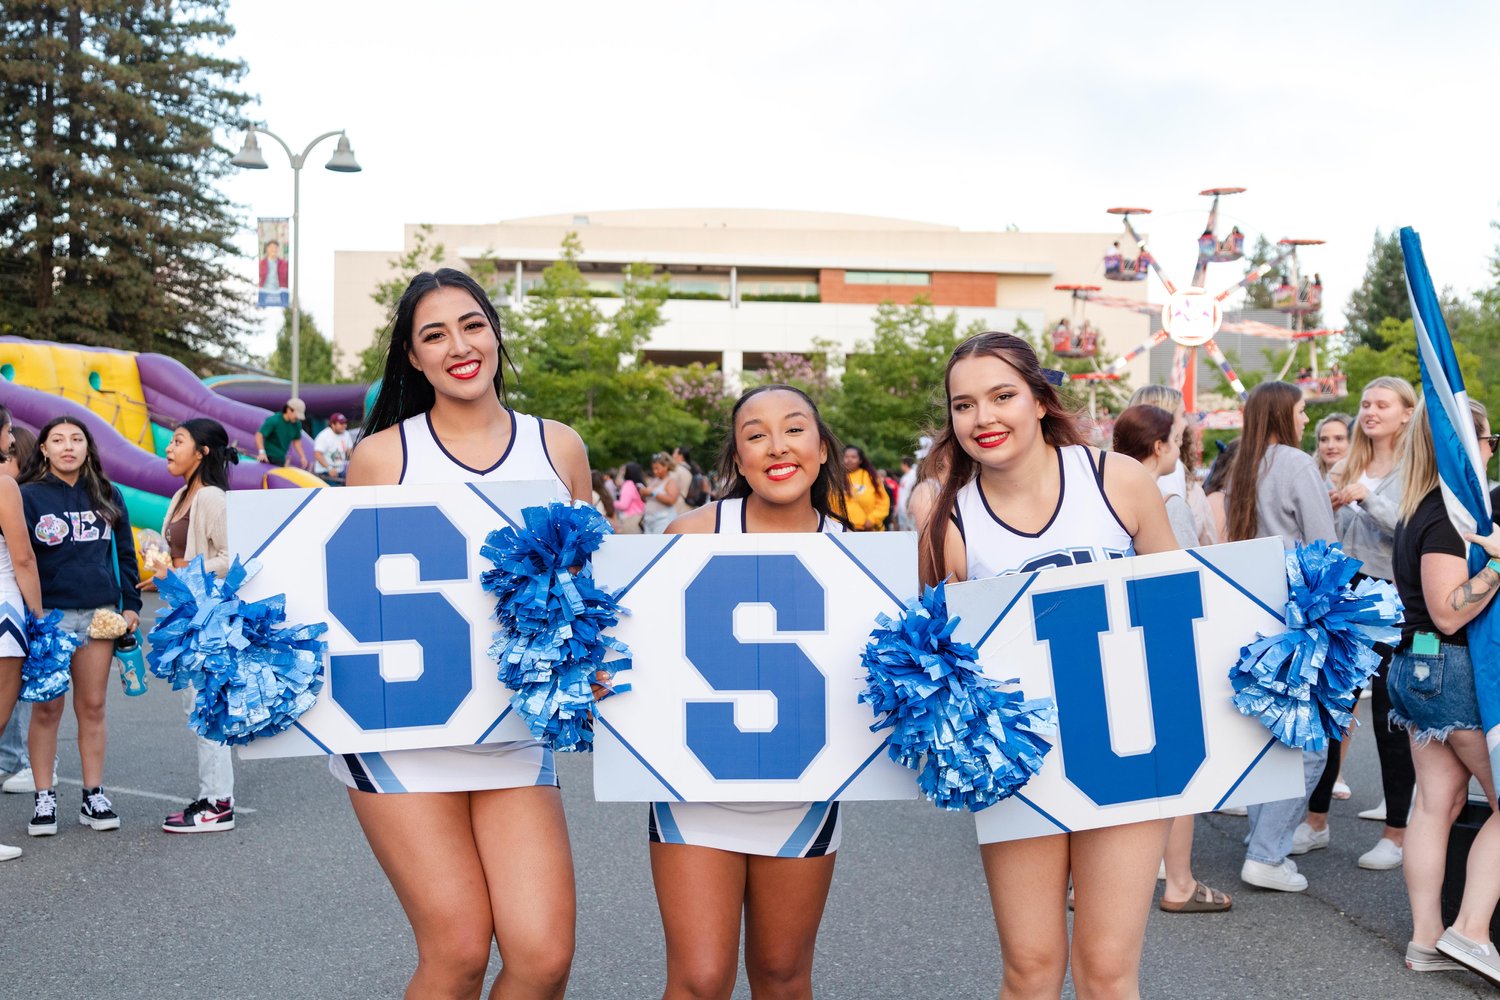 Cheerleaders posed with the letters 'SSU' at Big Nite